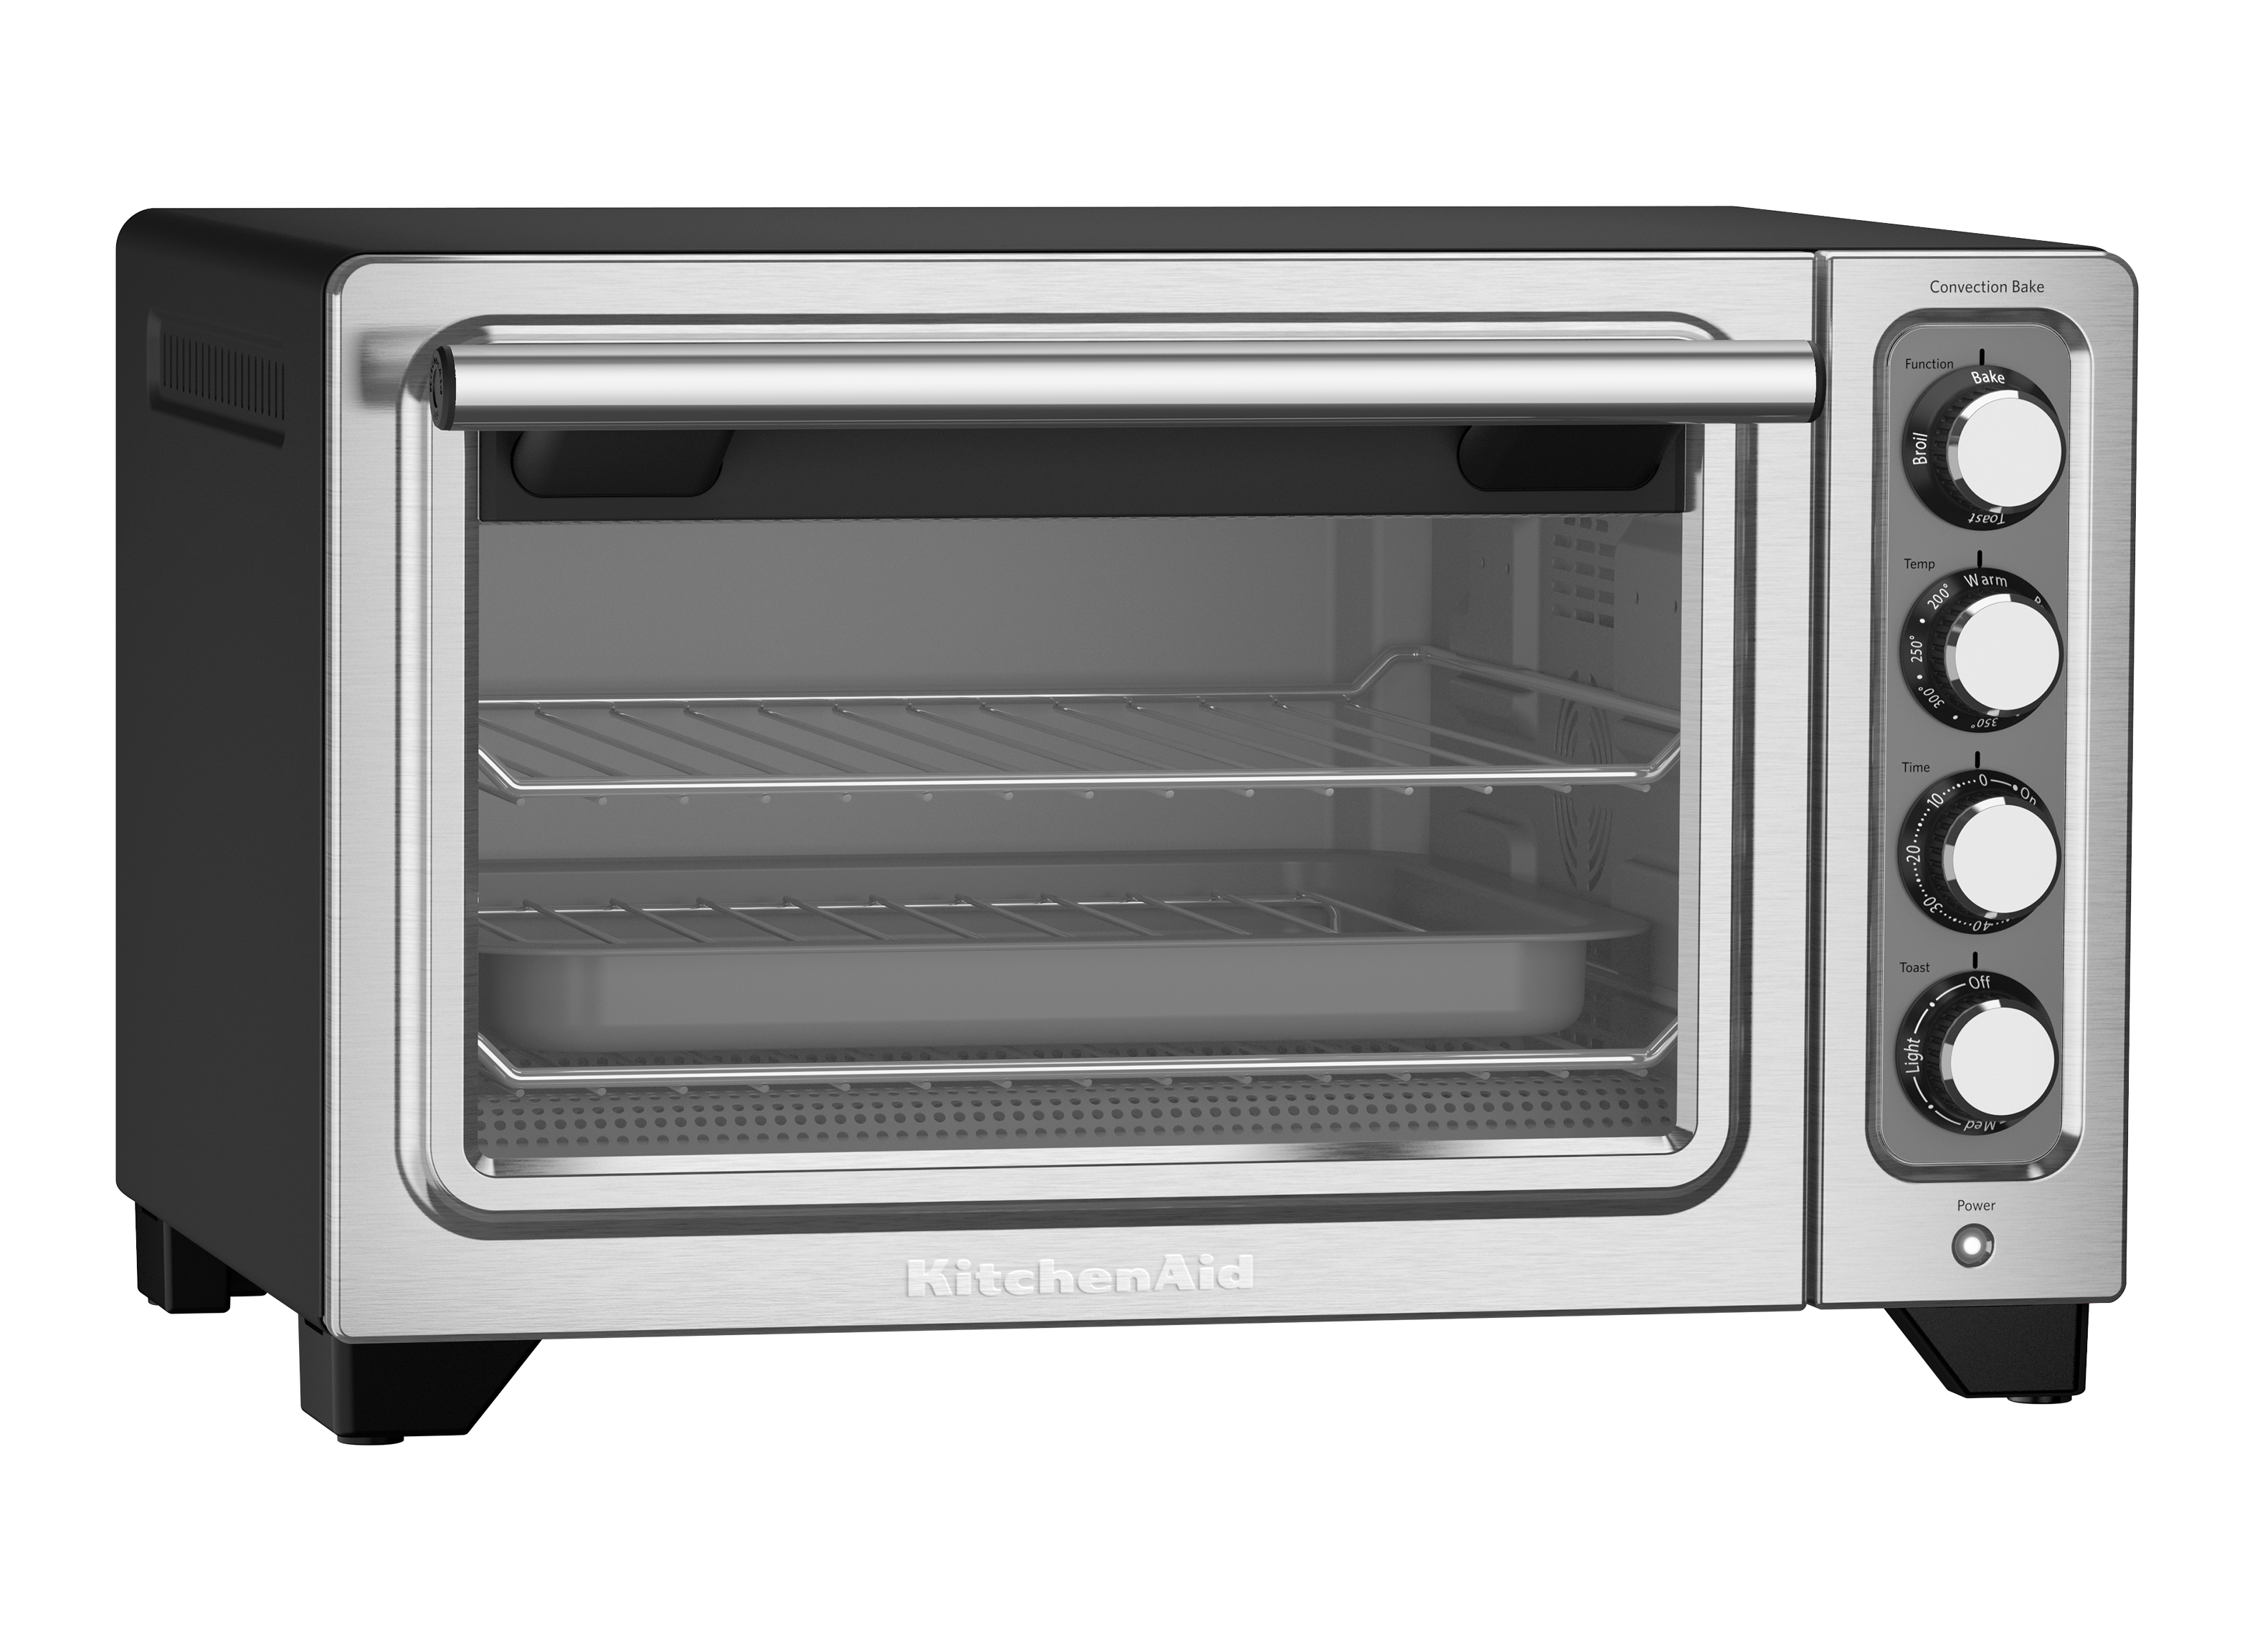  KitchenAid Dual Convection Countertop Oven with Air